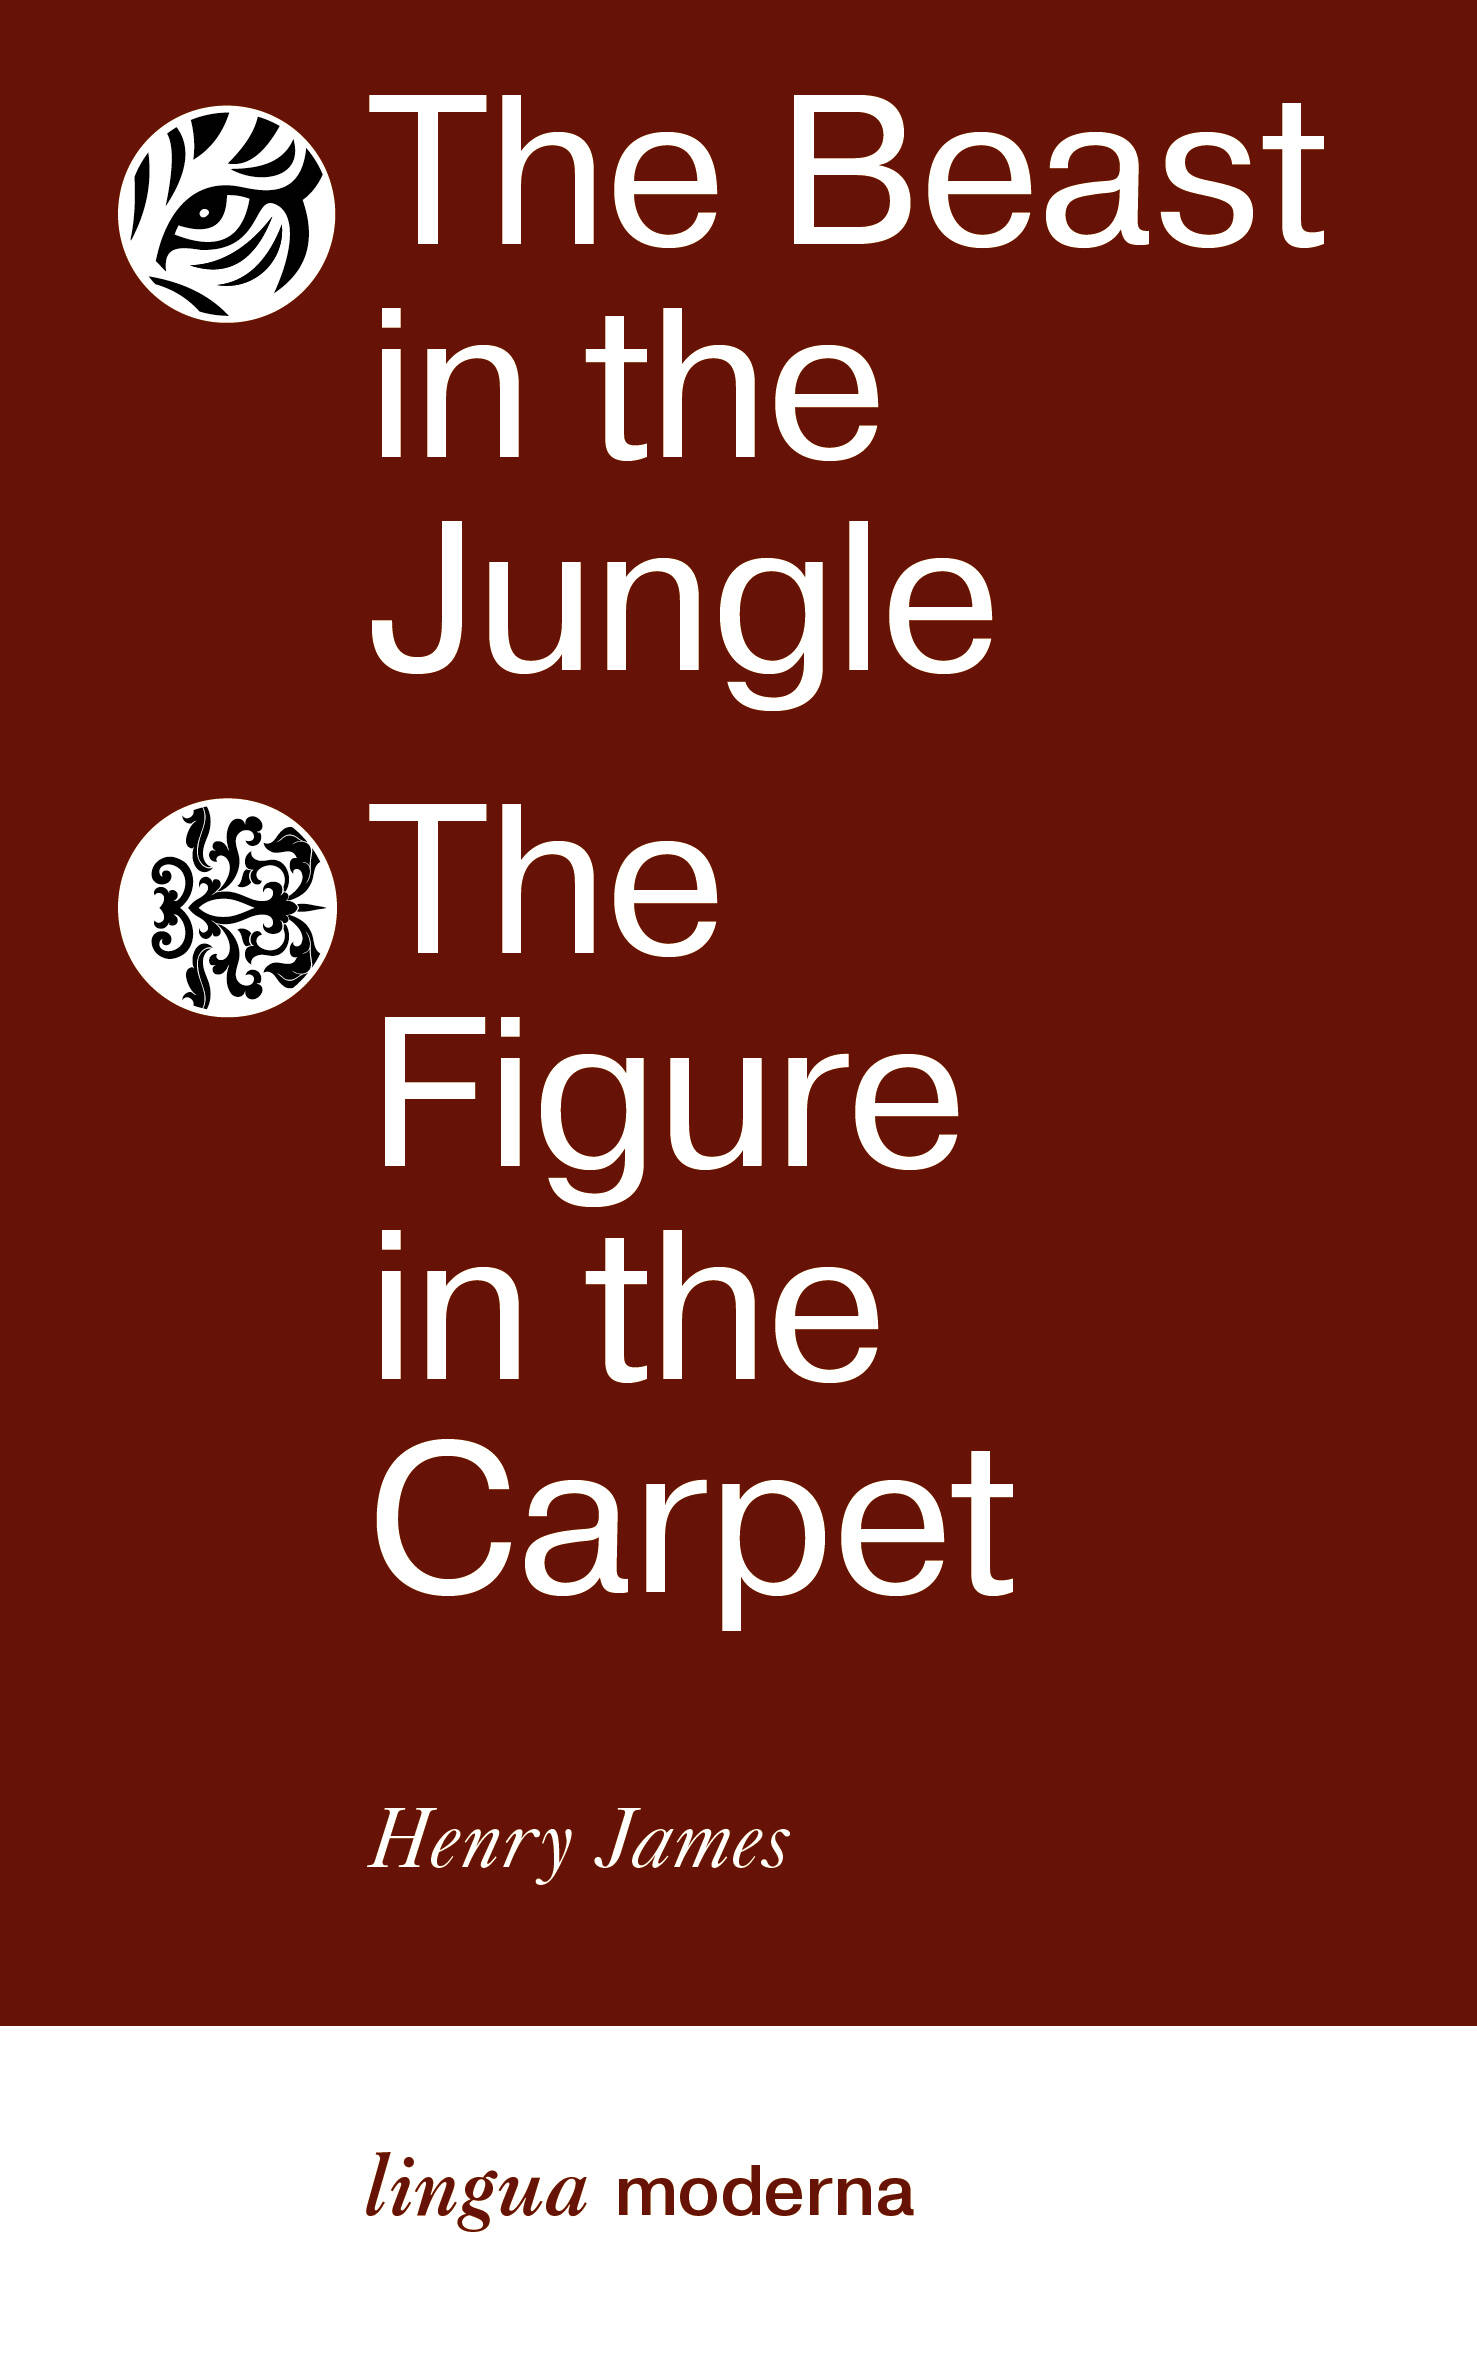 henry james the beast in the jungle the figure in the carpet The Beast in the Jungle. The Figure in the Carpet